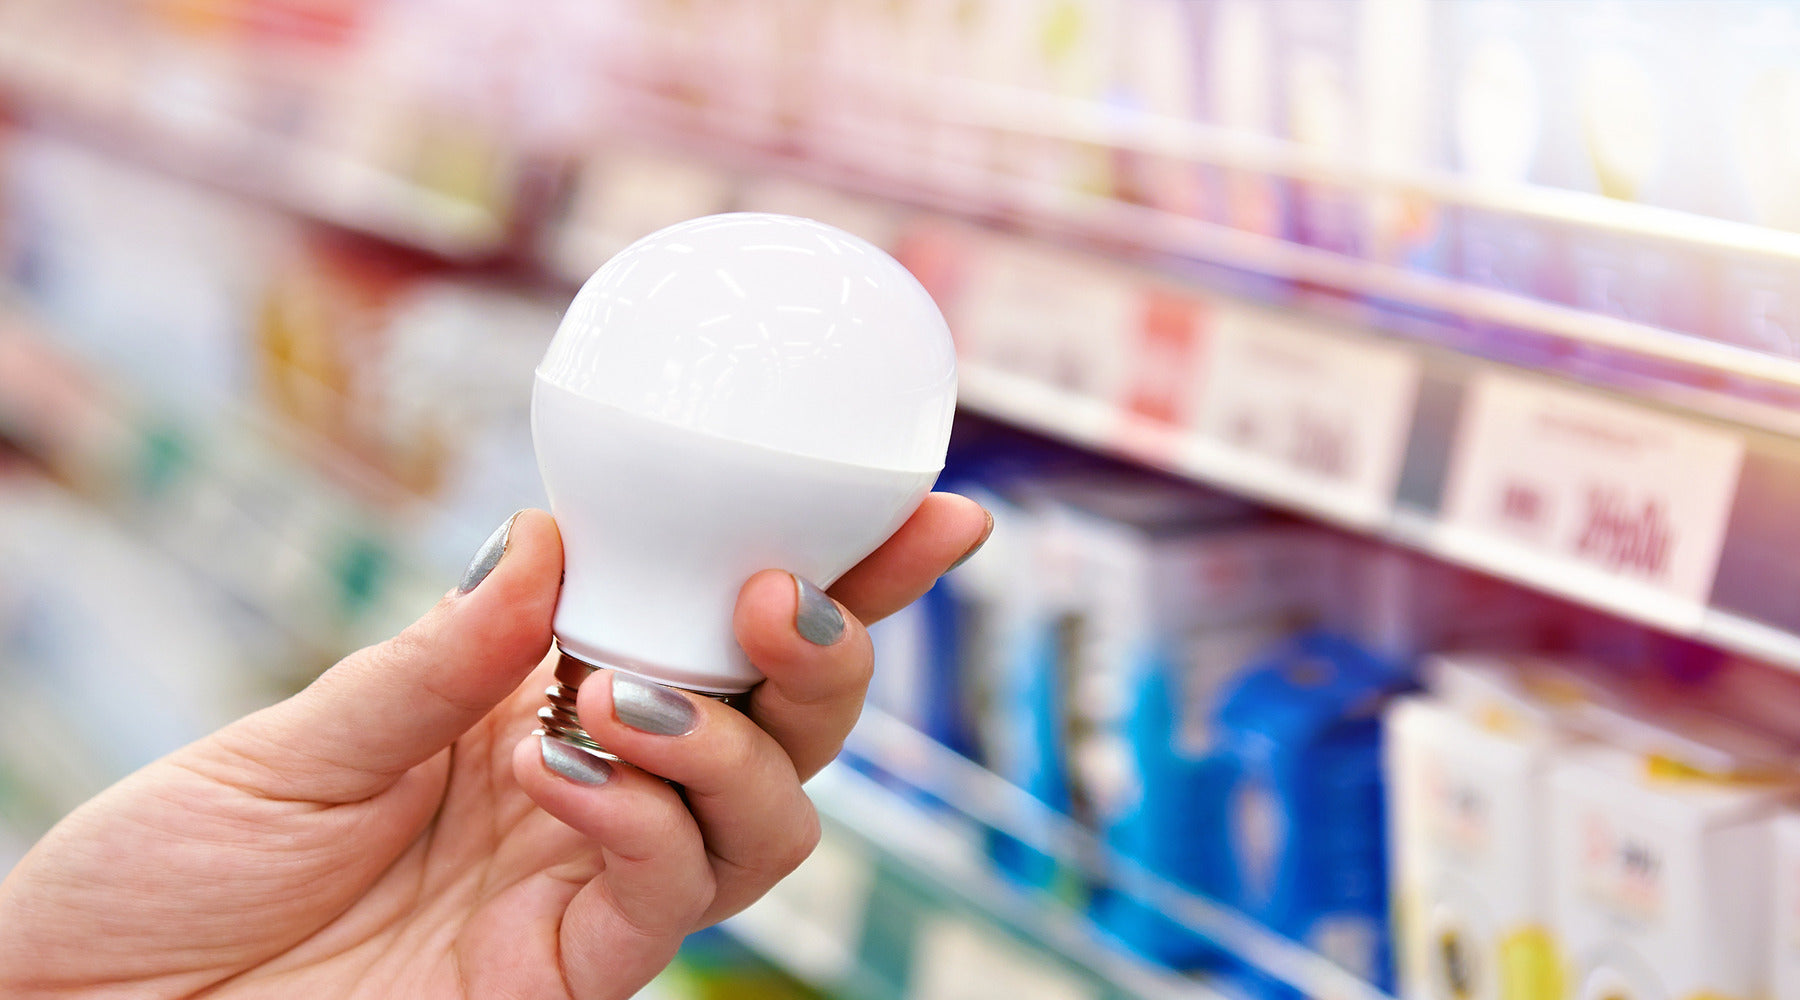 Energy saving LED bulb in hands of buyer at store